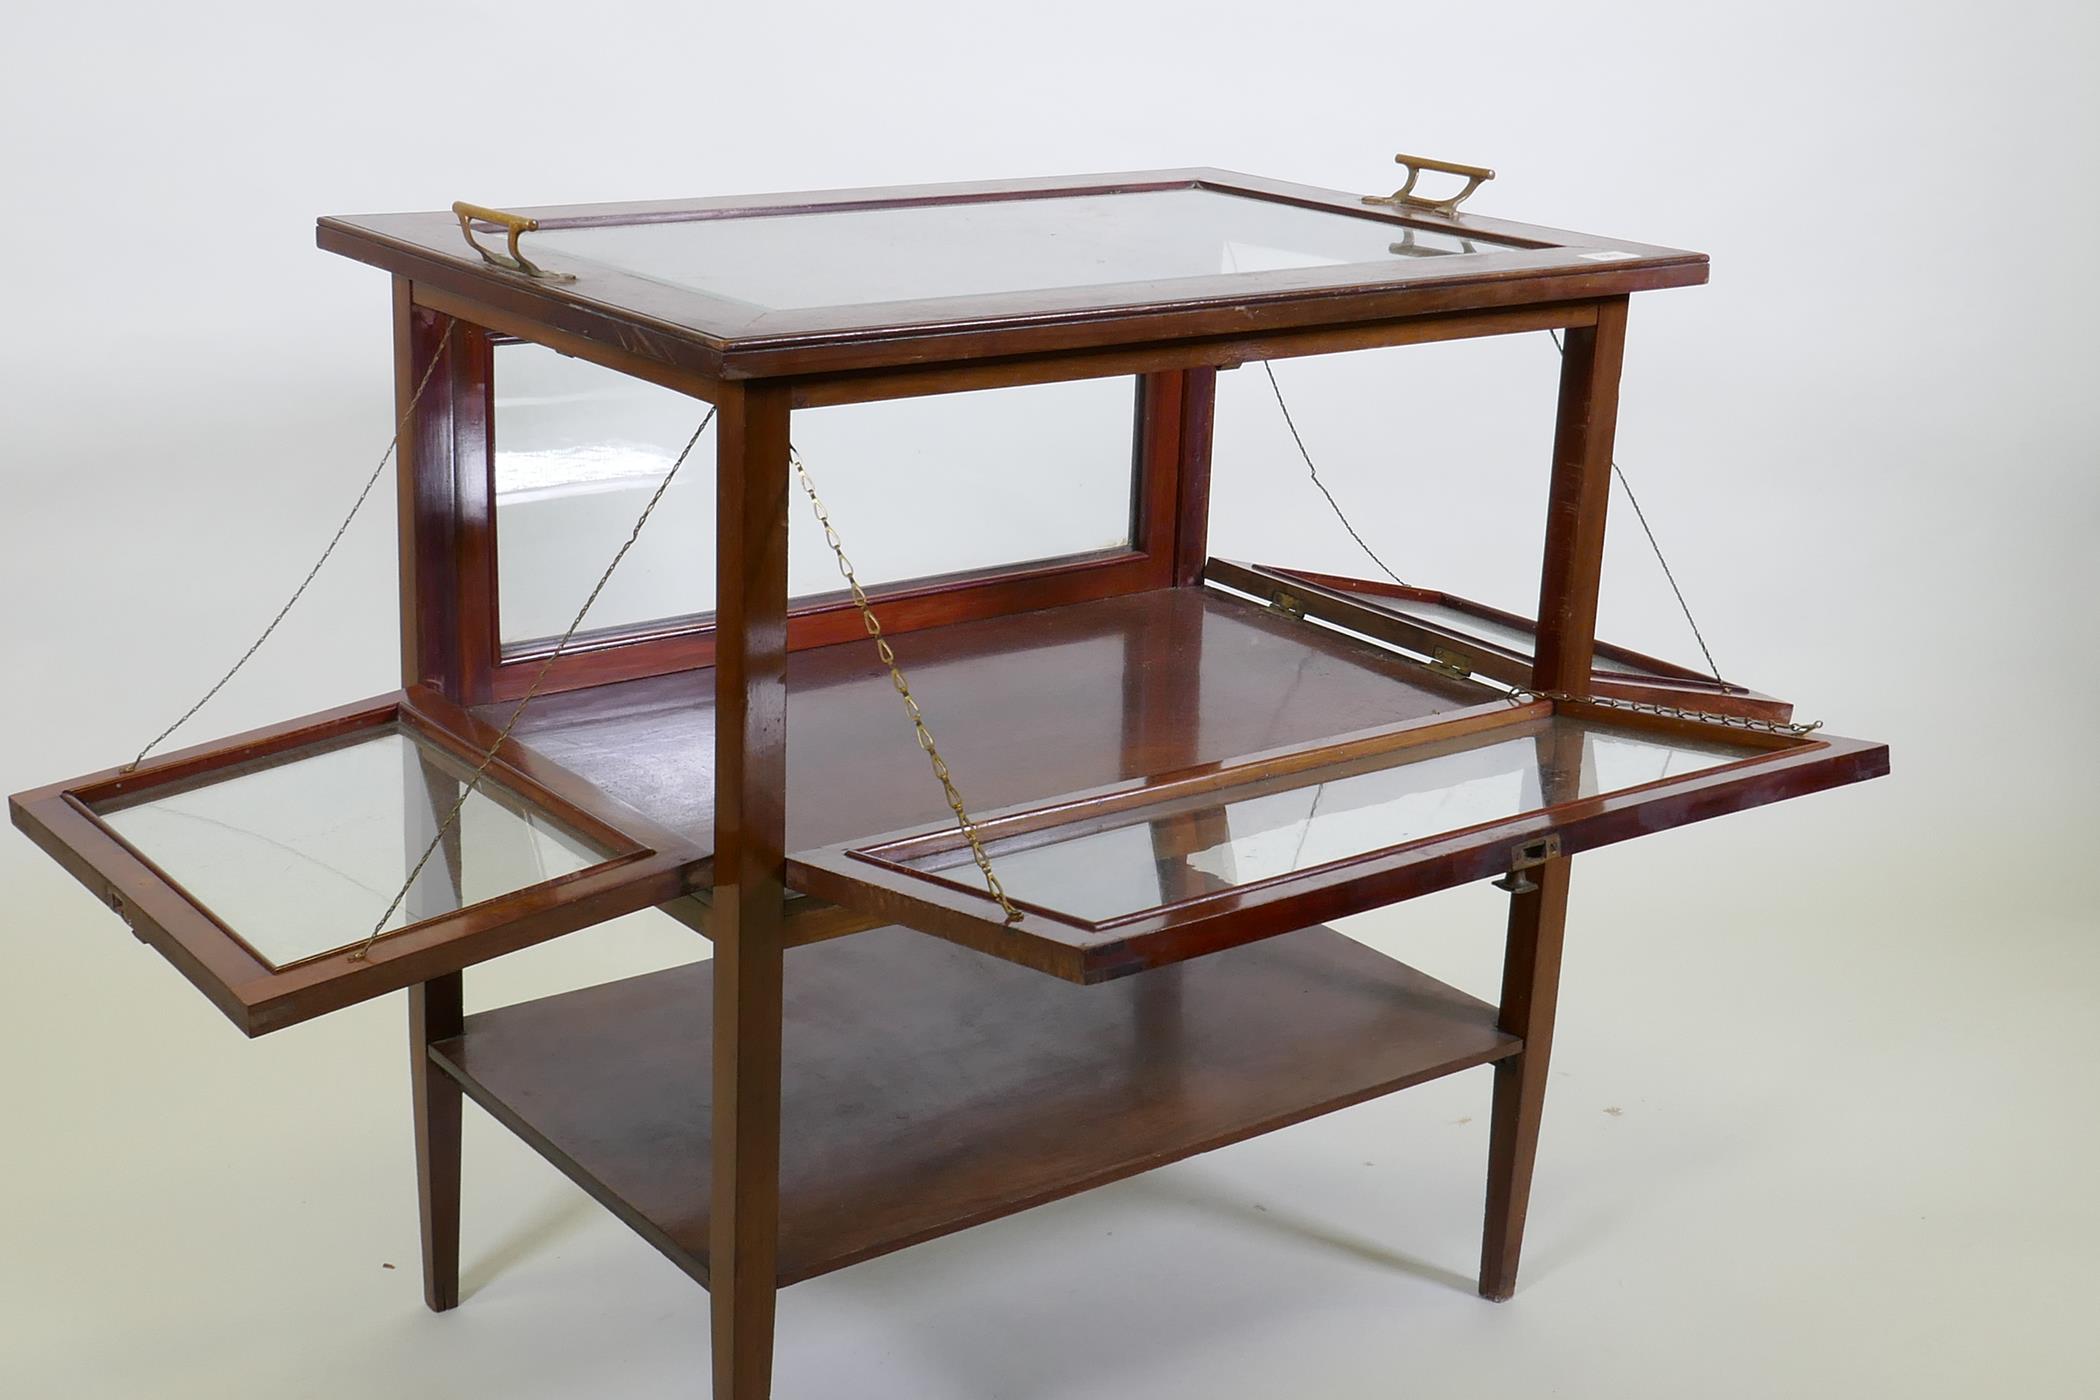 An Edwardian mahogany vitrine/display cabinet with fall front and sides and bevelled glass top, 74 x - Image 4 of 4